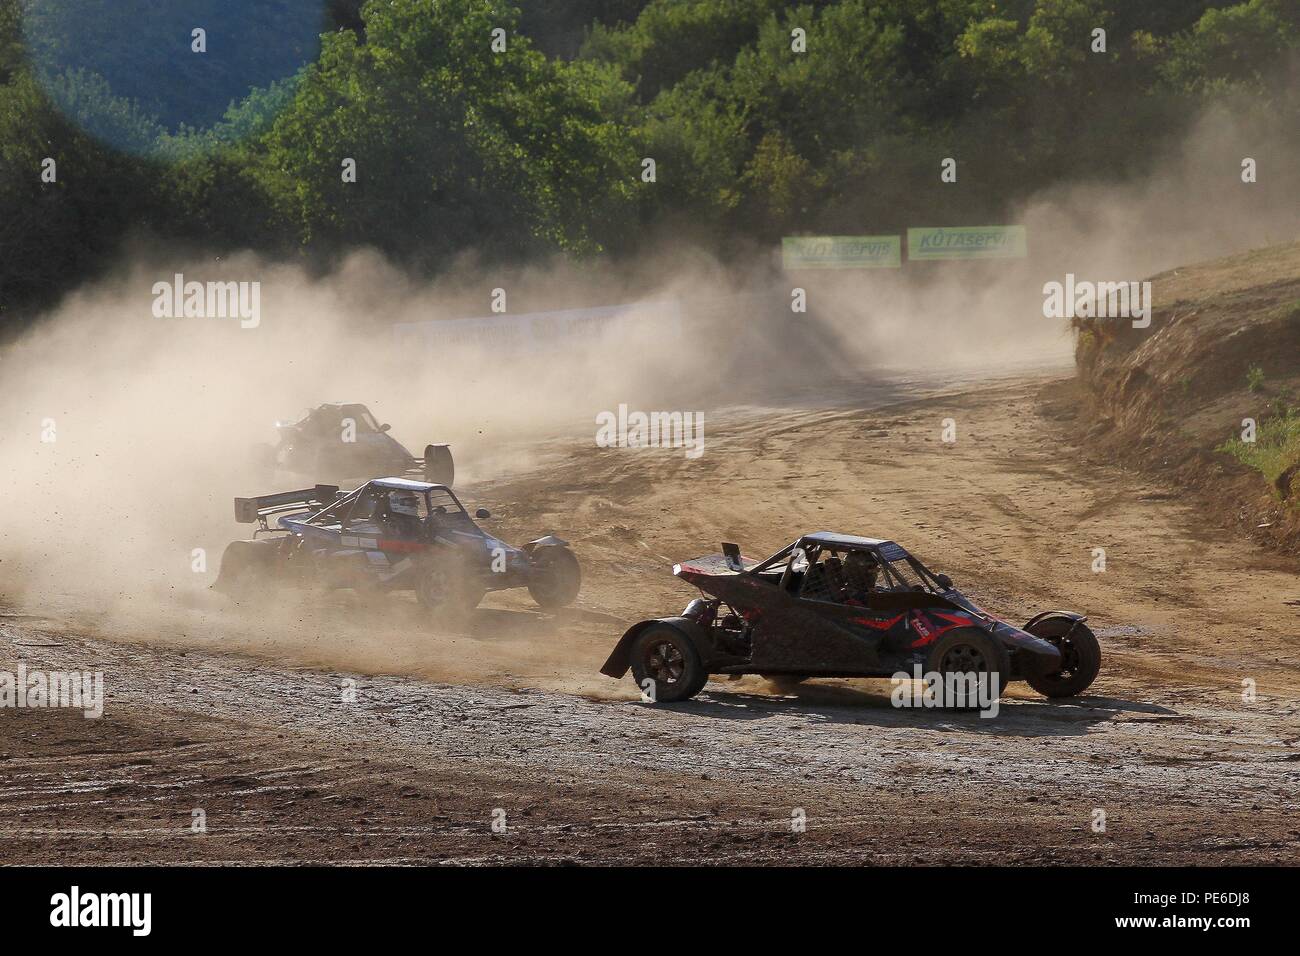 Superbuggy High Resolution Stock Photography and Images - Alamy